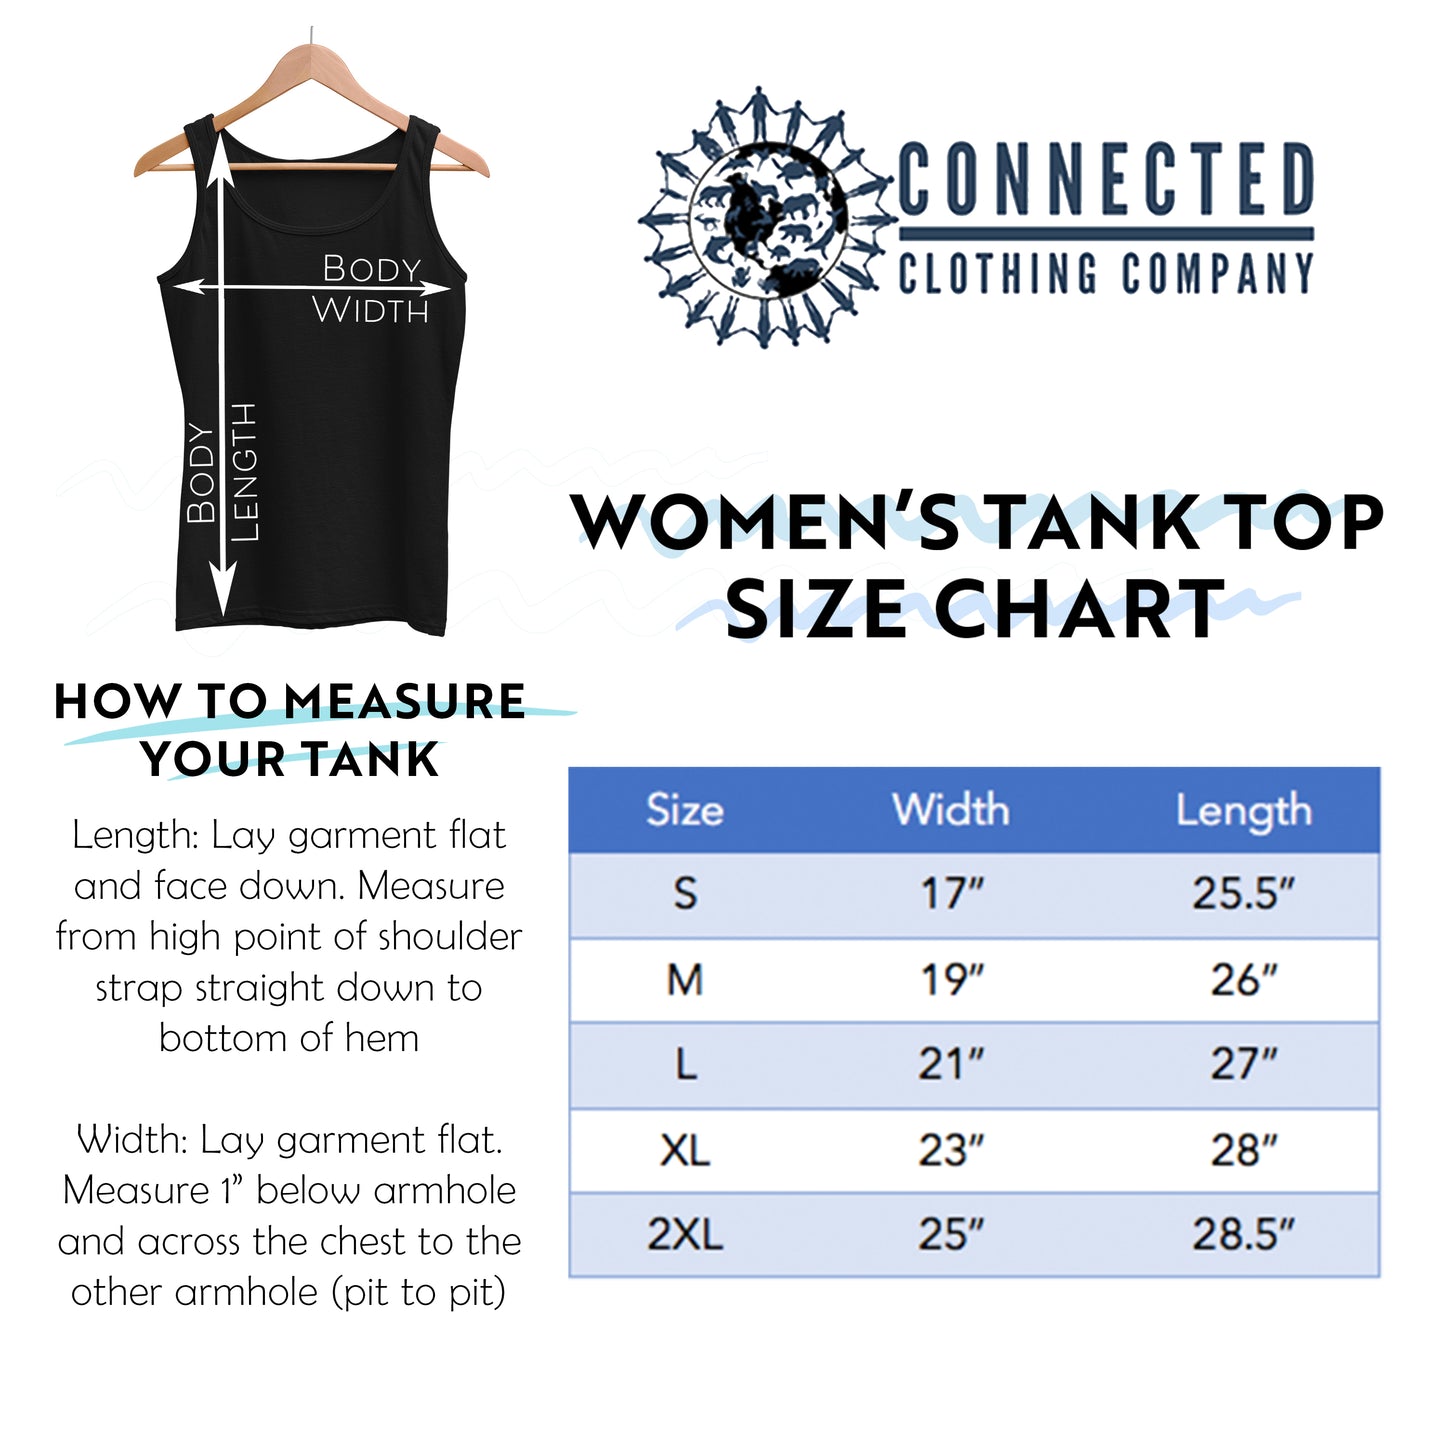 Women's Tank Top Size Chart - Connected Clothing Company - Ethically and Sustainably Made - 10% donated to Save The Rhino International